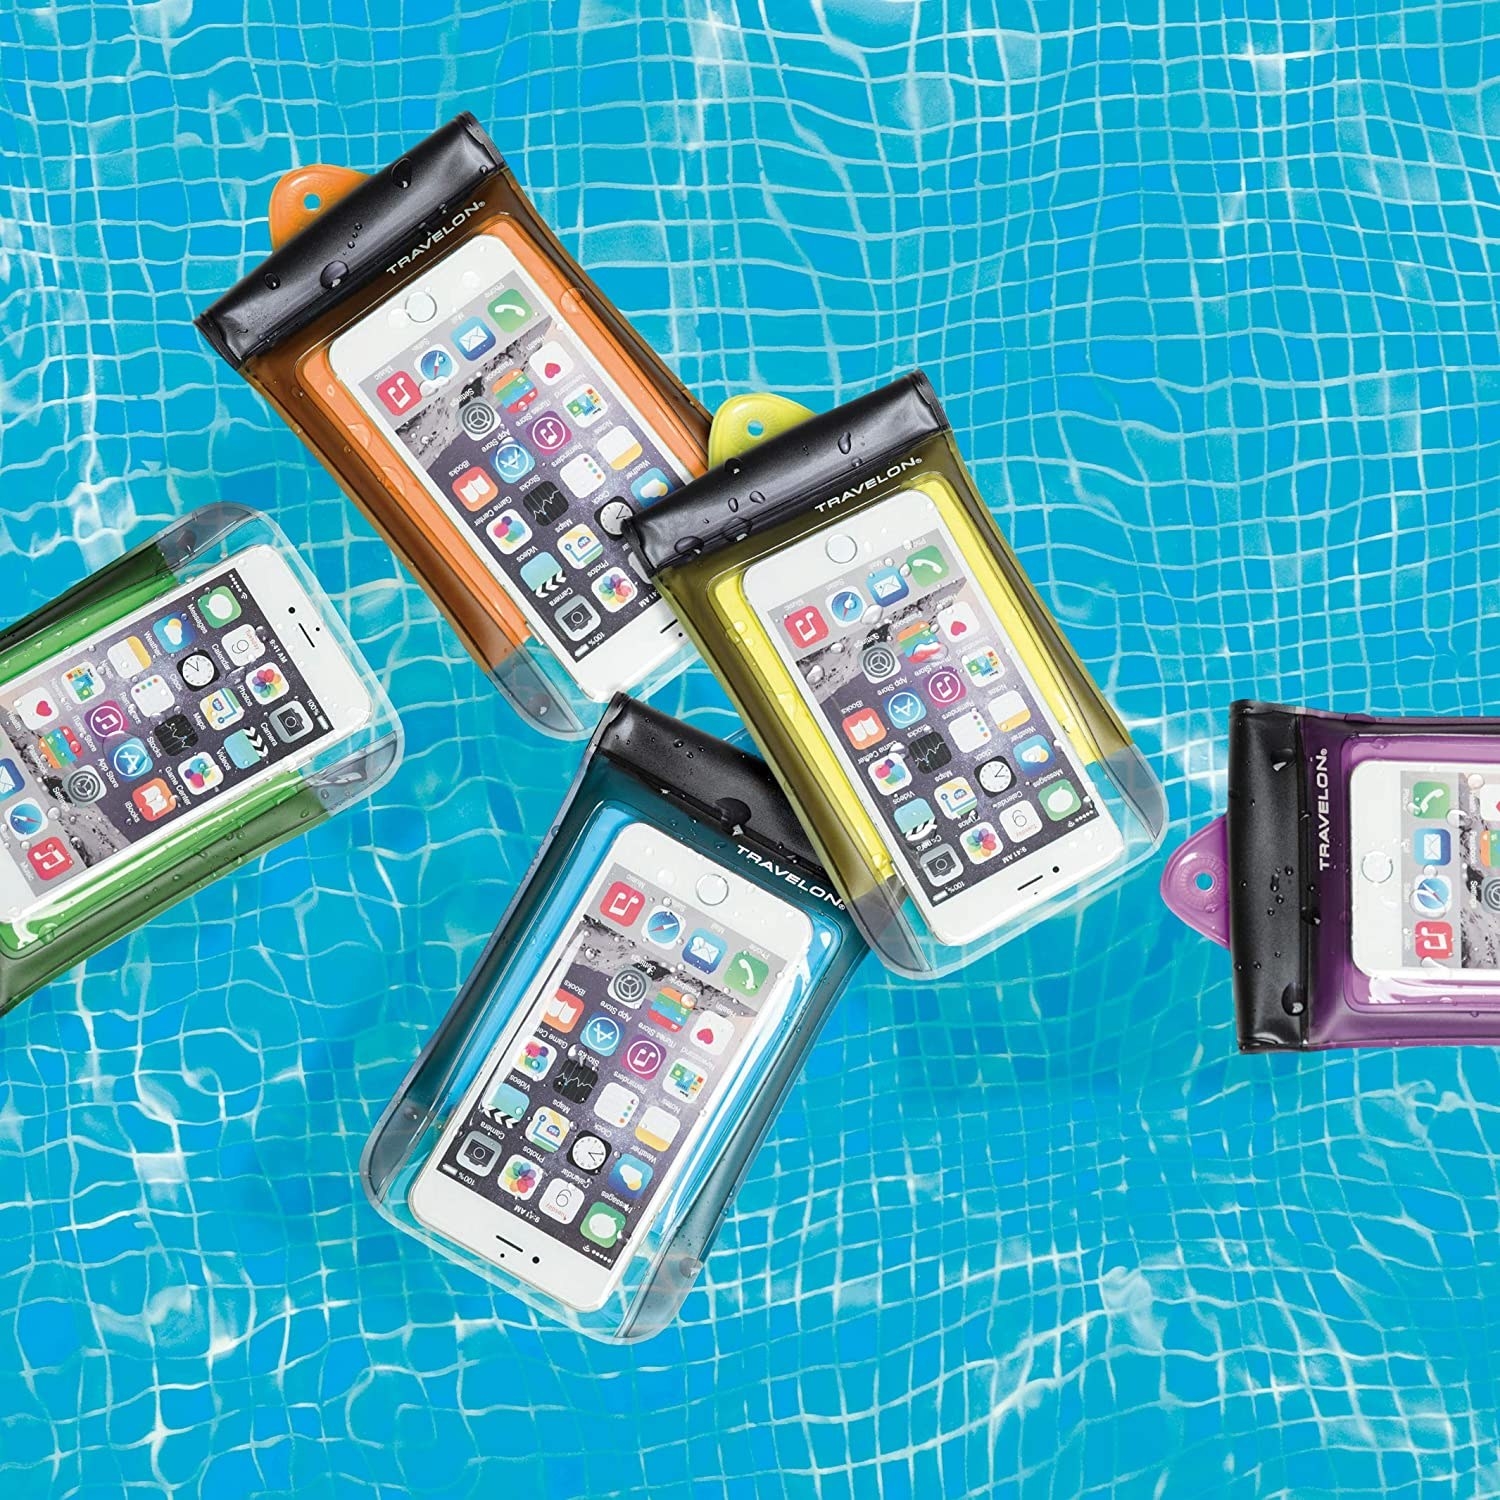 Several phones floating in a pool while safe inside the waterproof cases